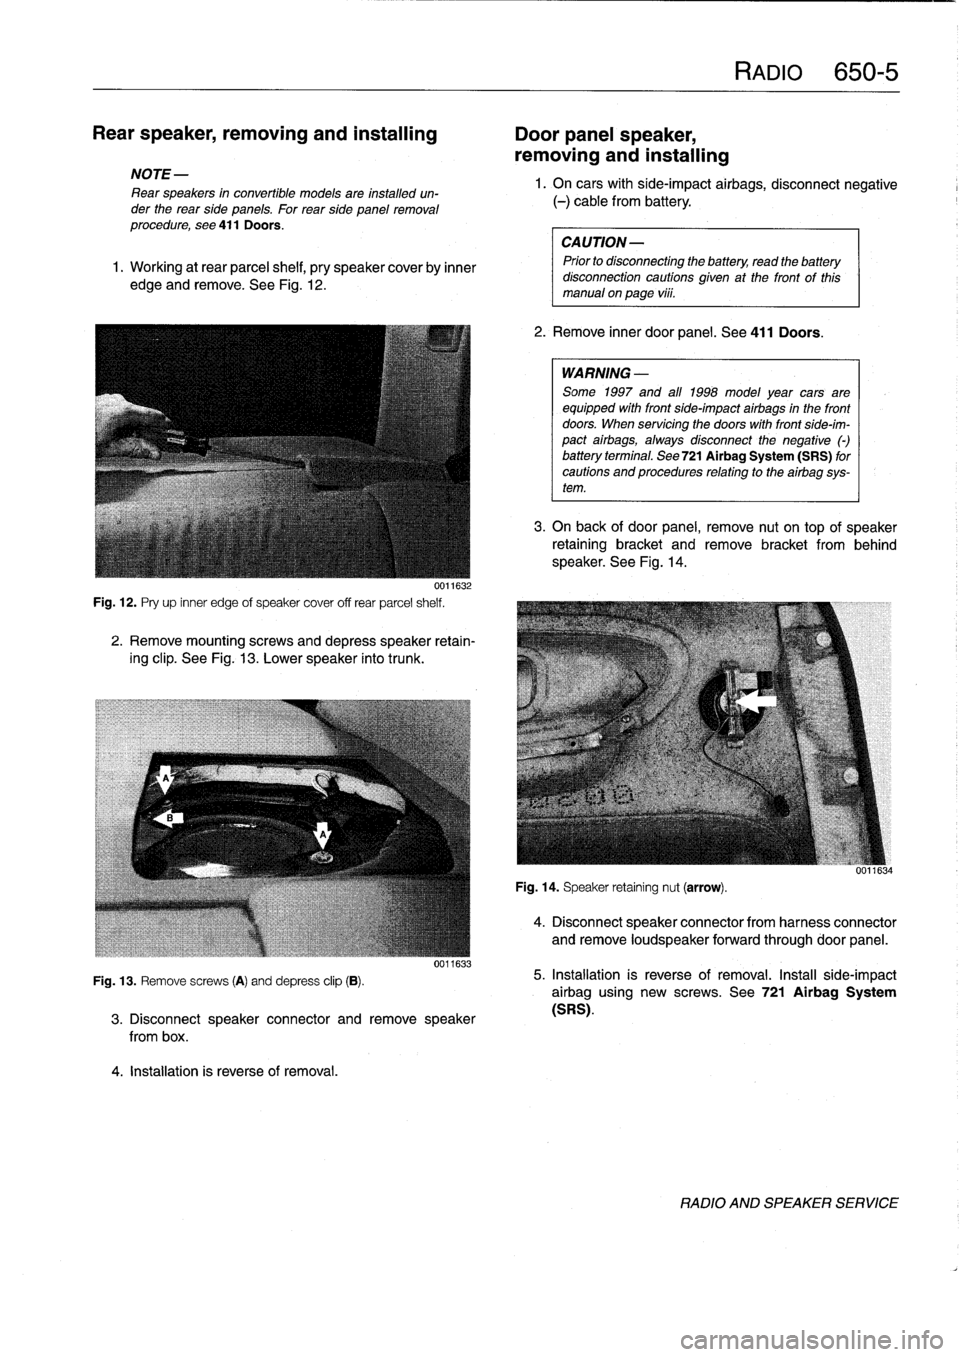 BMW M3 1996 E36 User Guide 
Rear
speaker,
removing
and
installing

	

Door
panel
speaker,

removing
and
installing

NOTE
-

Rear
speakers
in
convertible
models
are
installed
un-
der
the
rear
side
panels
.
For
rearside
panelremo